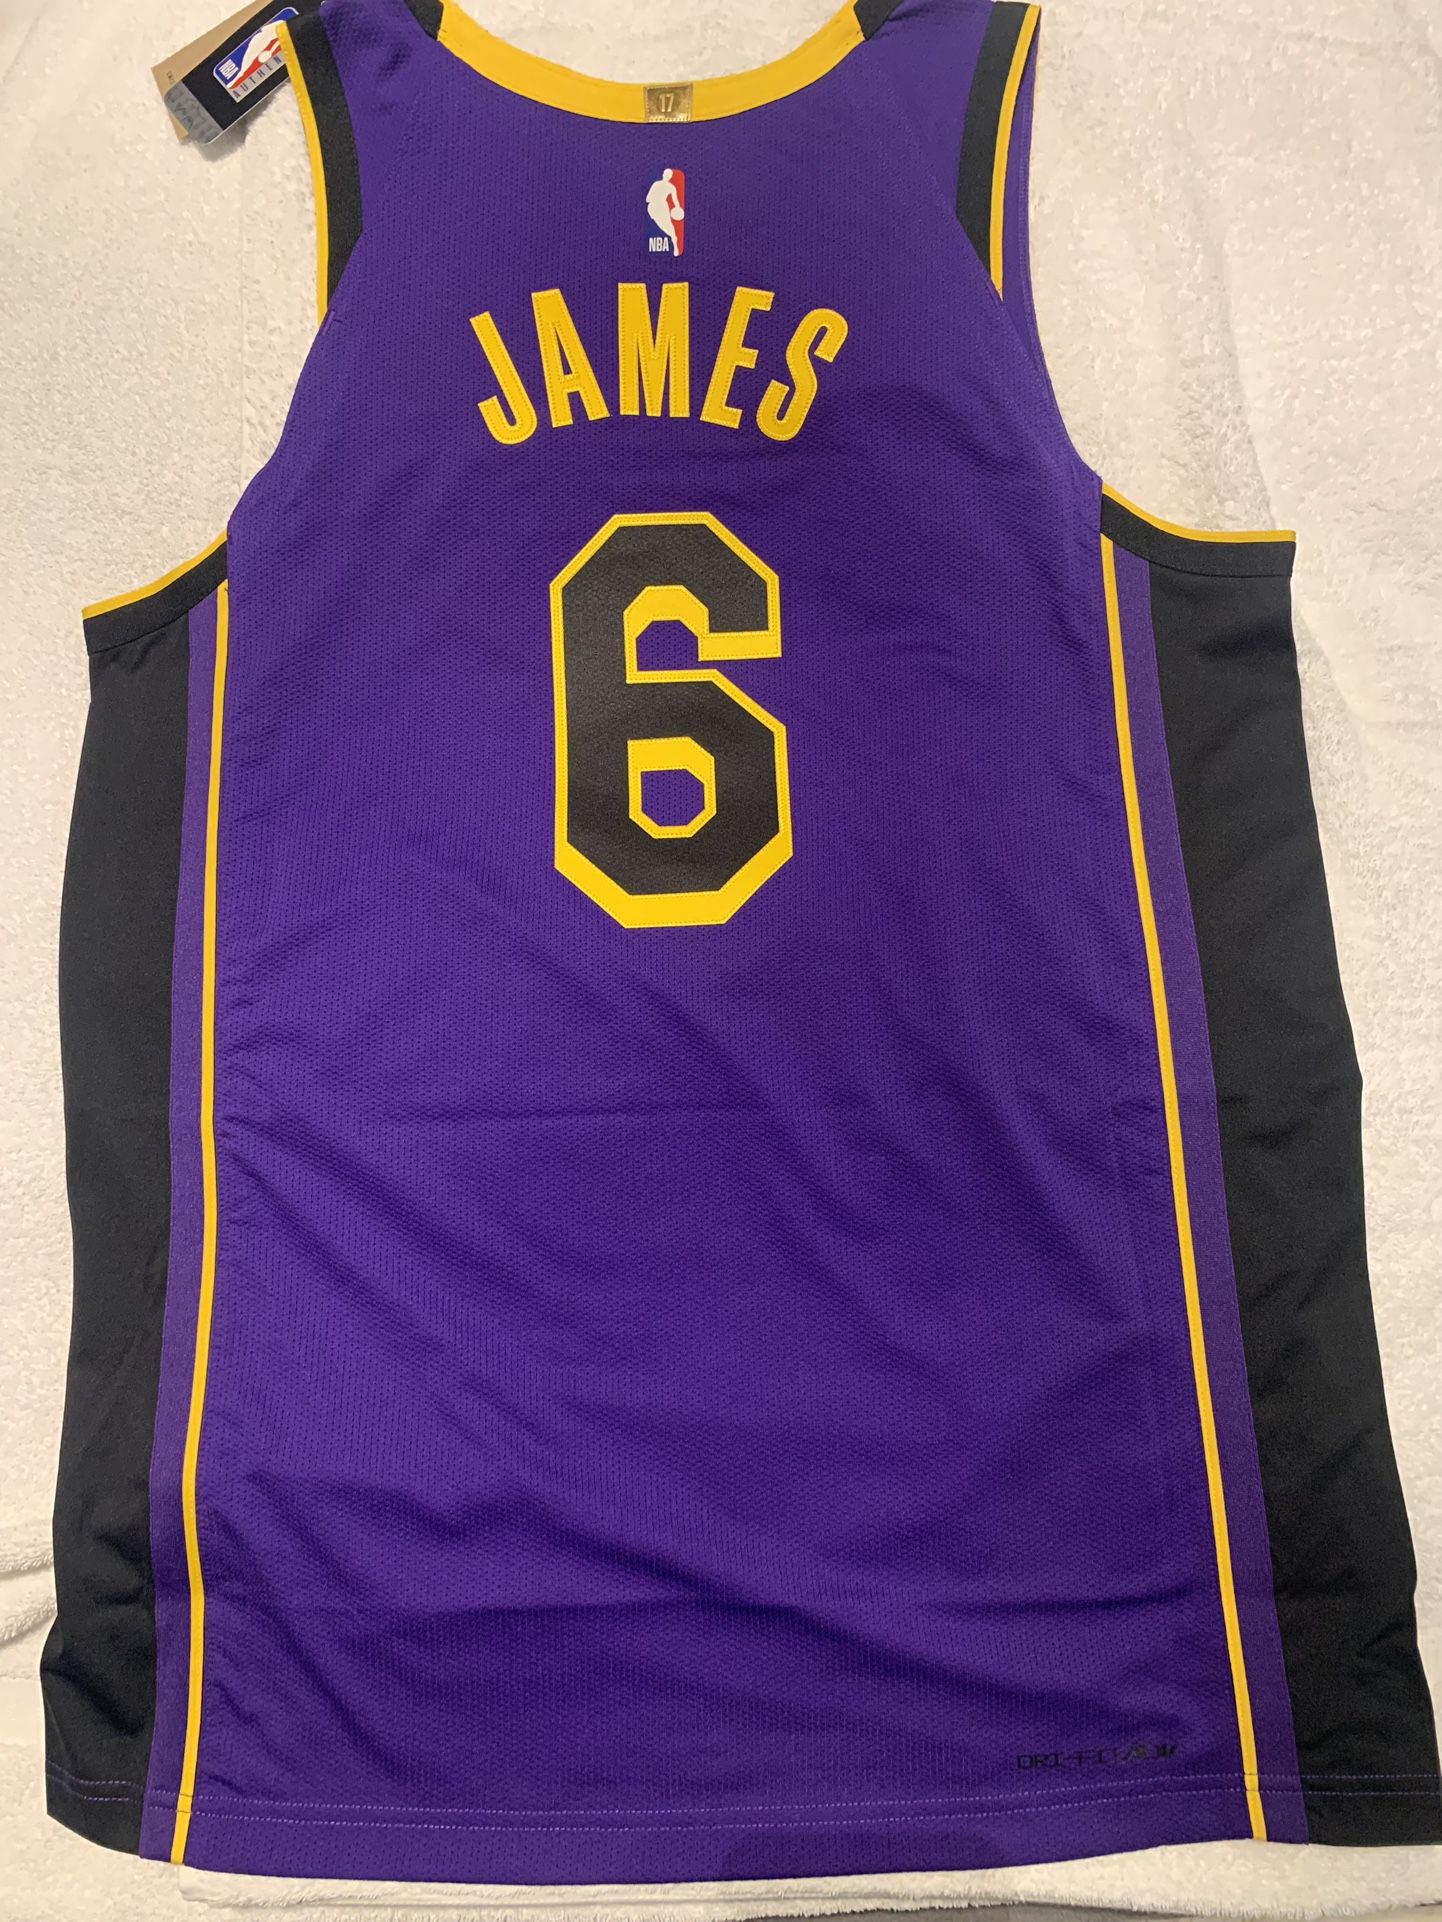 Lebron James Miami Heat Jersey for Sale in Paramount, CA - OfferUp